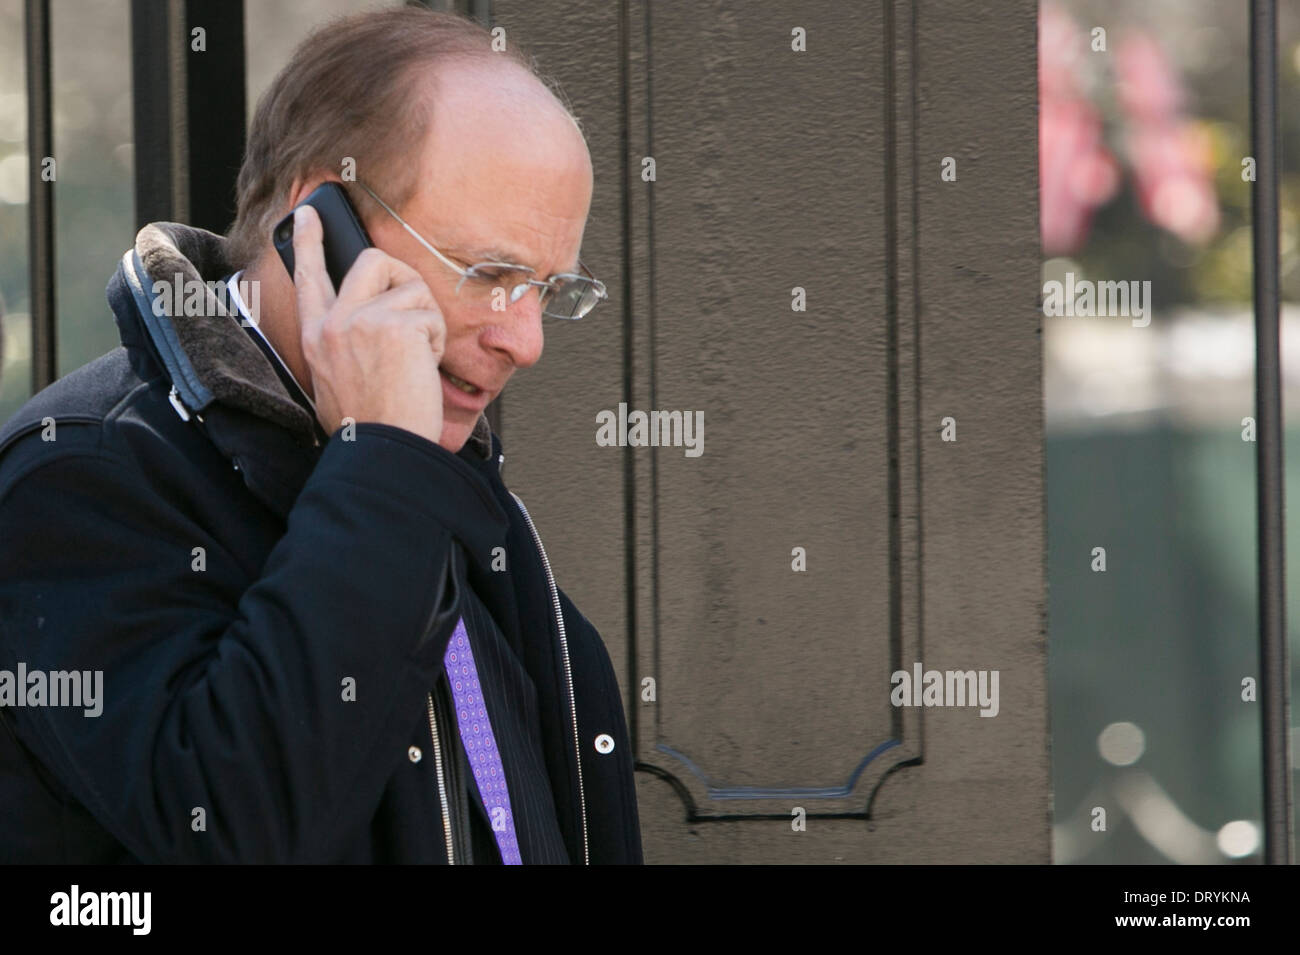 Laurence 'Larry' D. Fink, CEO of BlackRock departs the White House following a meeting with President Barack Obama. Stock Photo